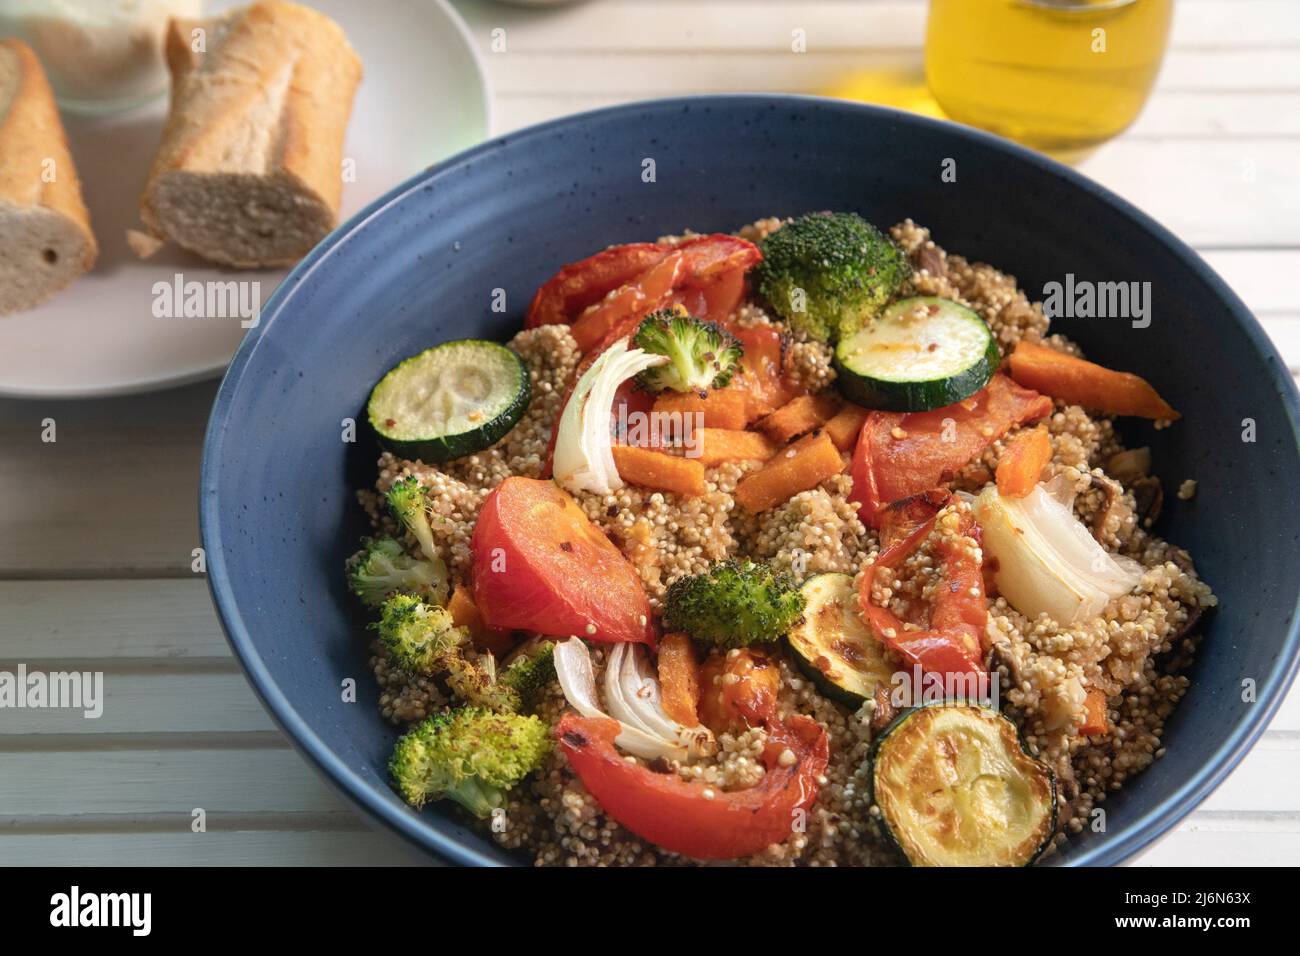 Top view of quinoa salad on white natural wood surface. Stock Photo